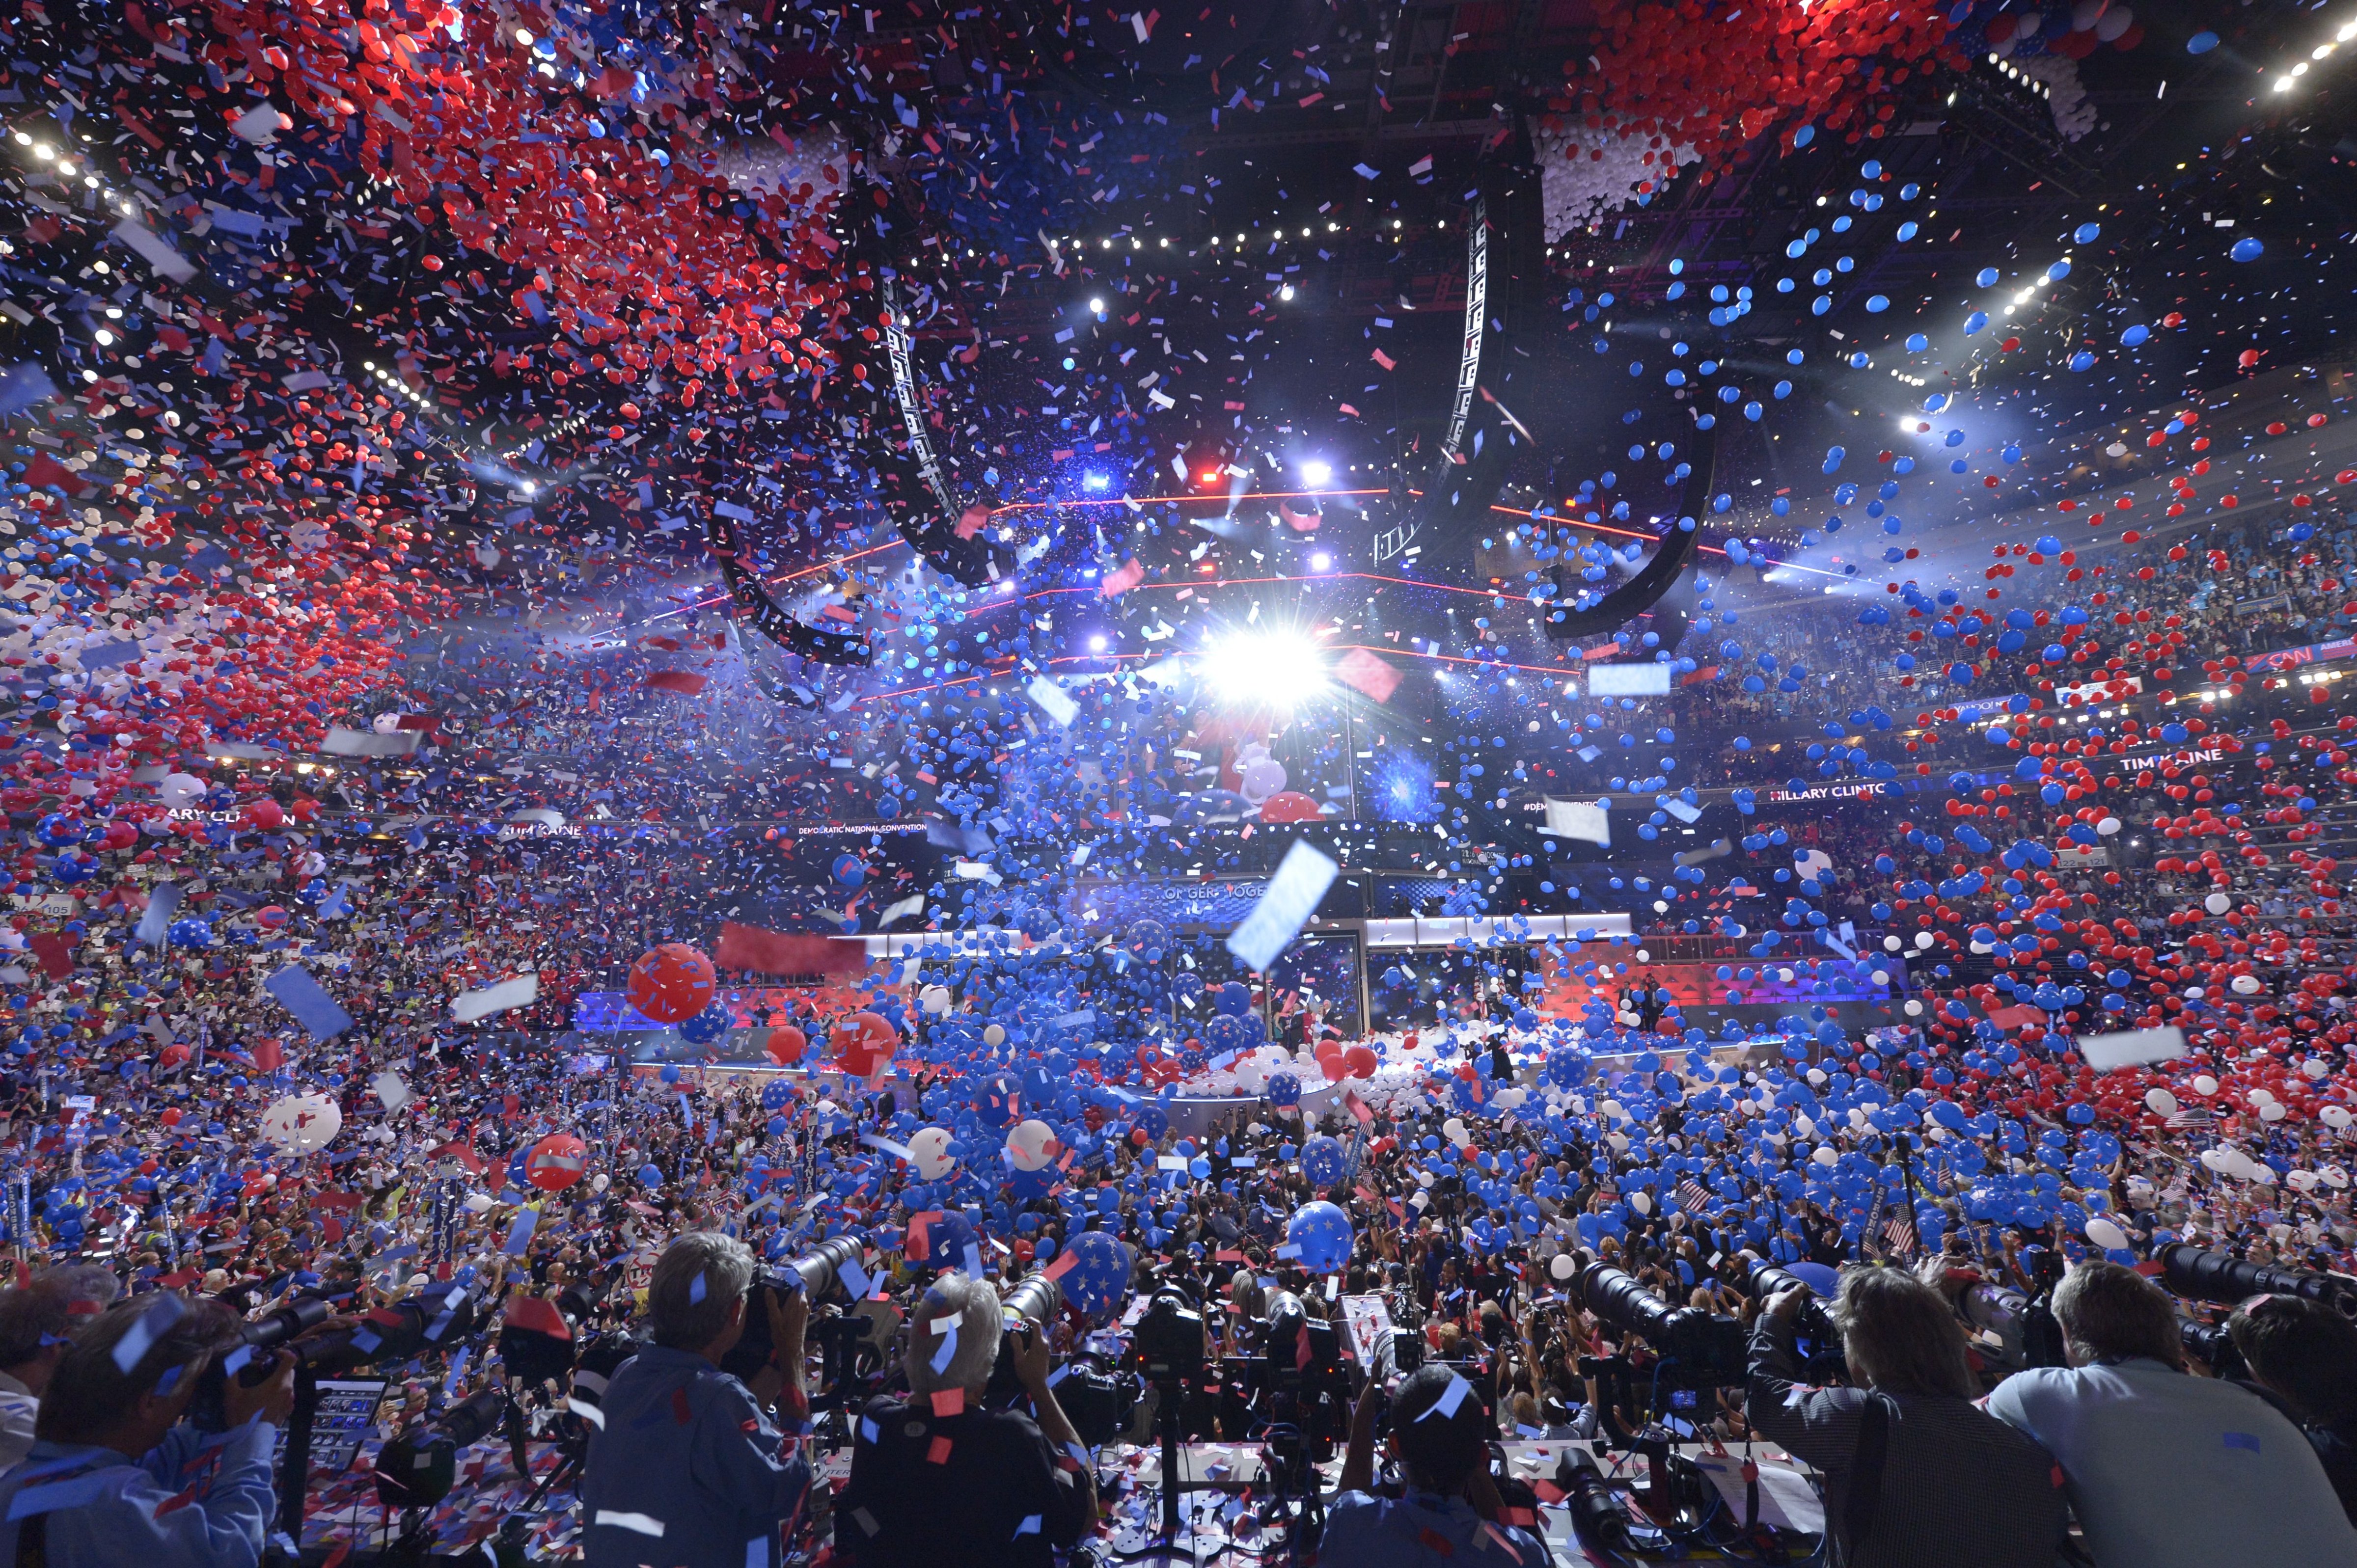 Balloons come down on at the end of the fourth and final night of the Democratic National Convention at Wells Fargo Center in Philadelphia, PA on July 28, 2016. (SAUL LOEB/AFP/Getty Images)